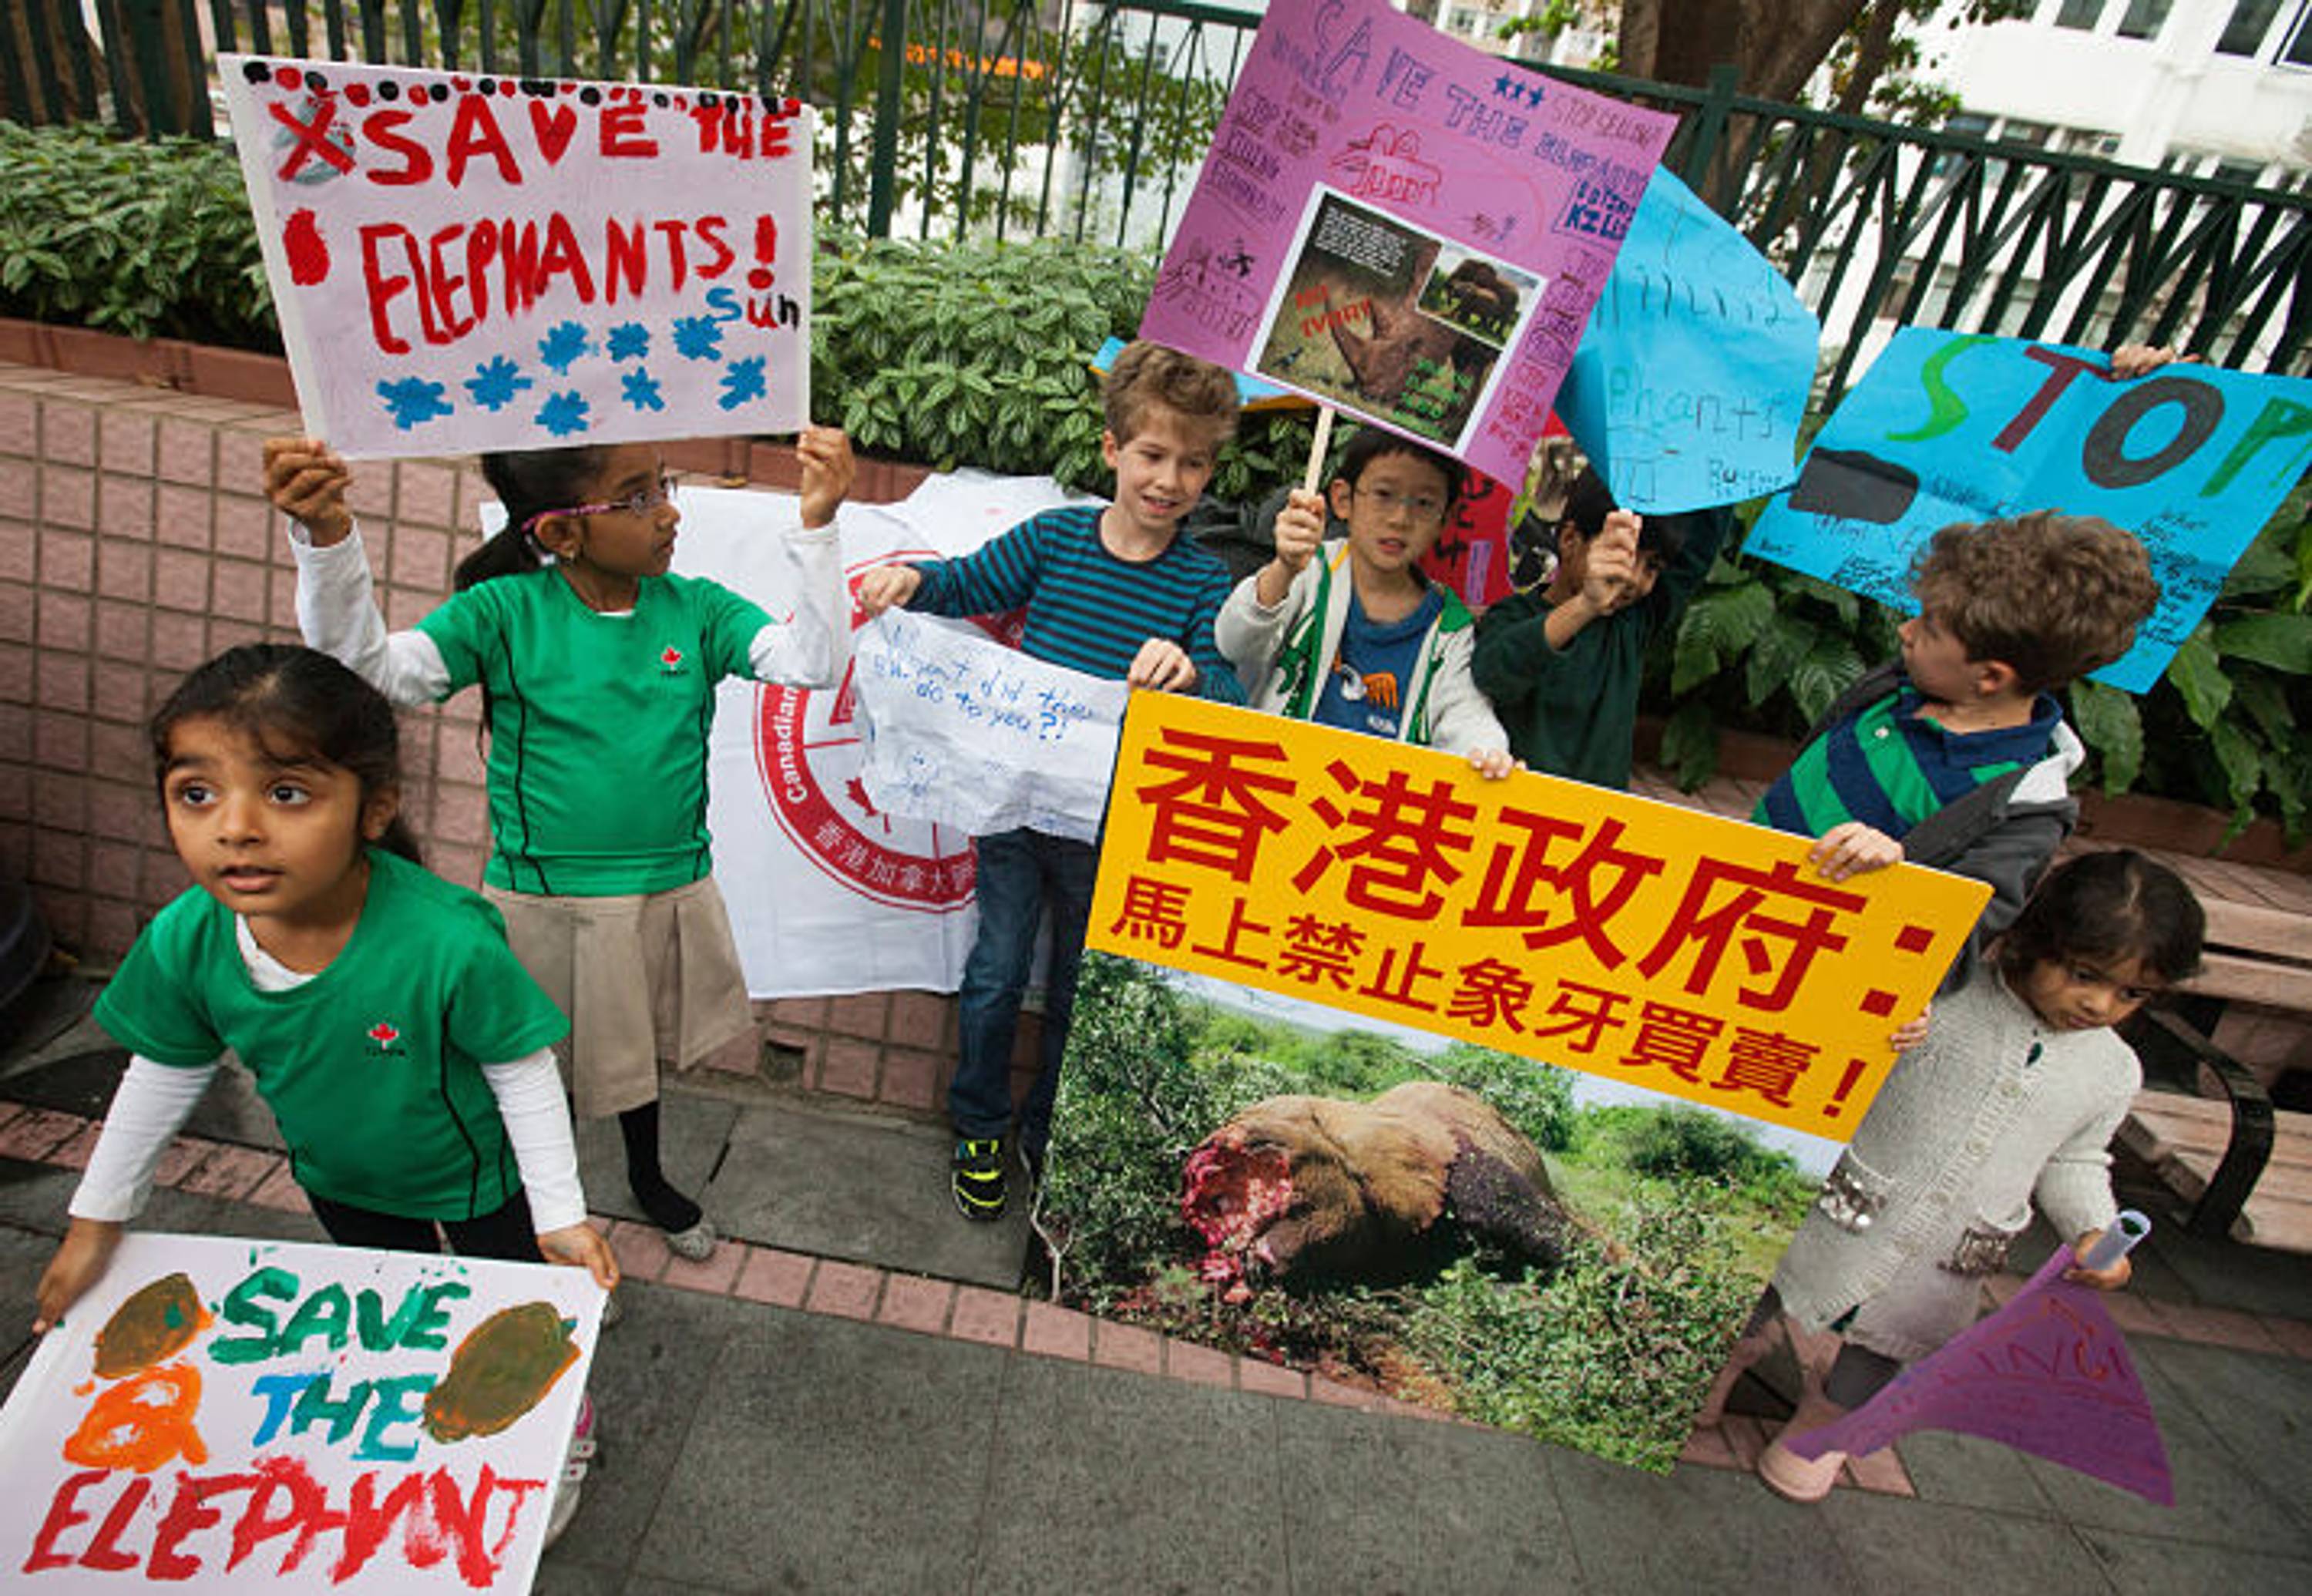 Children protest against Hong Kong&#39;s legal ivory trade in the city&#39;s ivory selling district of Hollywood Road and Queen&#39;s Road Central, Sheung Wan, Hong Kong, China, 14 March 2015.  According to Kenya-based NGO &#39;Save the Elephants&#39;, 100,000 elephants were illegally-killed for their tusks from 2010 to 2012, a poaching crisis driven in large part by consumers in Hong Kong and China.